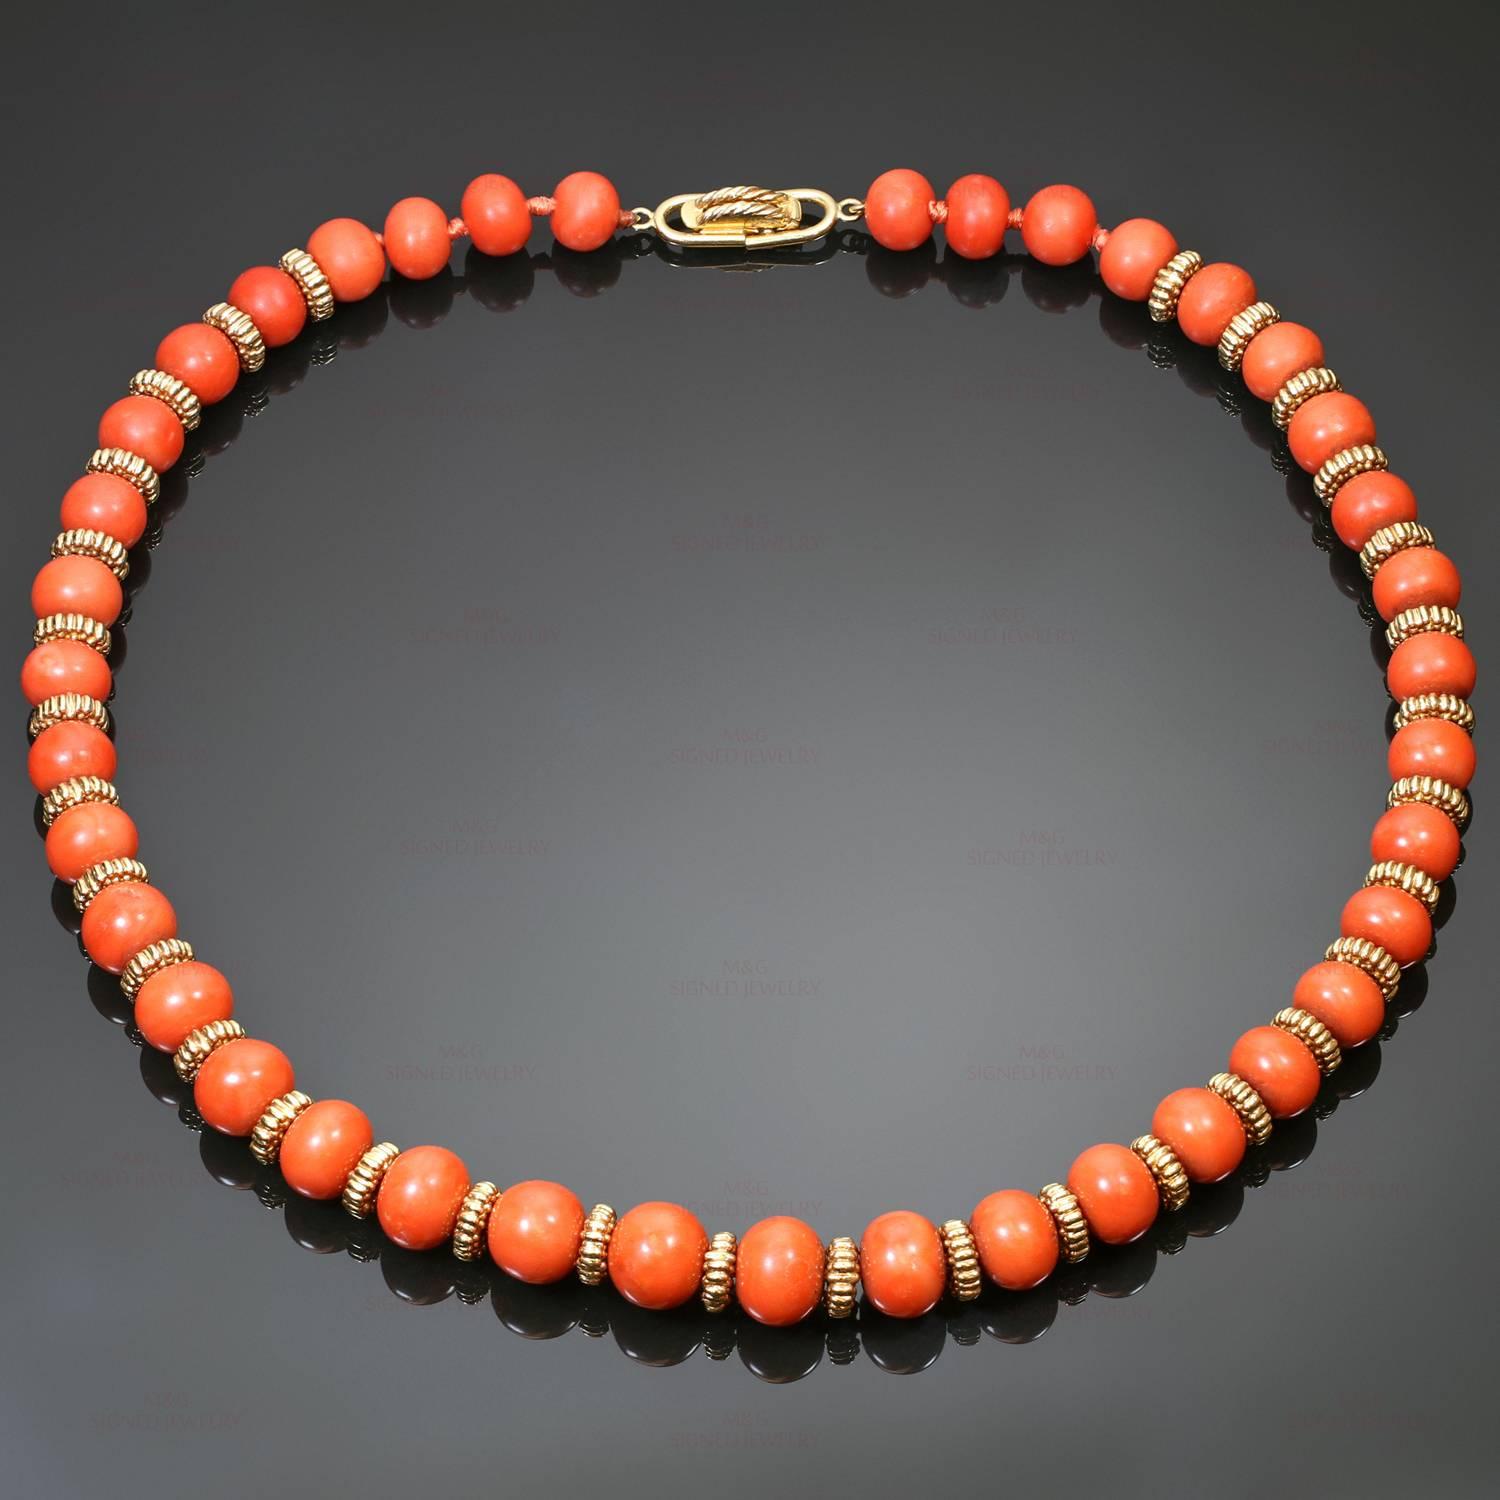 The exquisite and rare Van Cleef & Arpels necklace is composed of 39 red coral beads measuring from 9.40m x 7.50mm to 12.25m x 10.80mm, interspersed with 18k yellow gold rondelles, forming a single strand, and completed by an 18k yellow gold